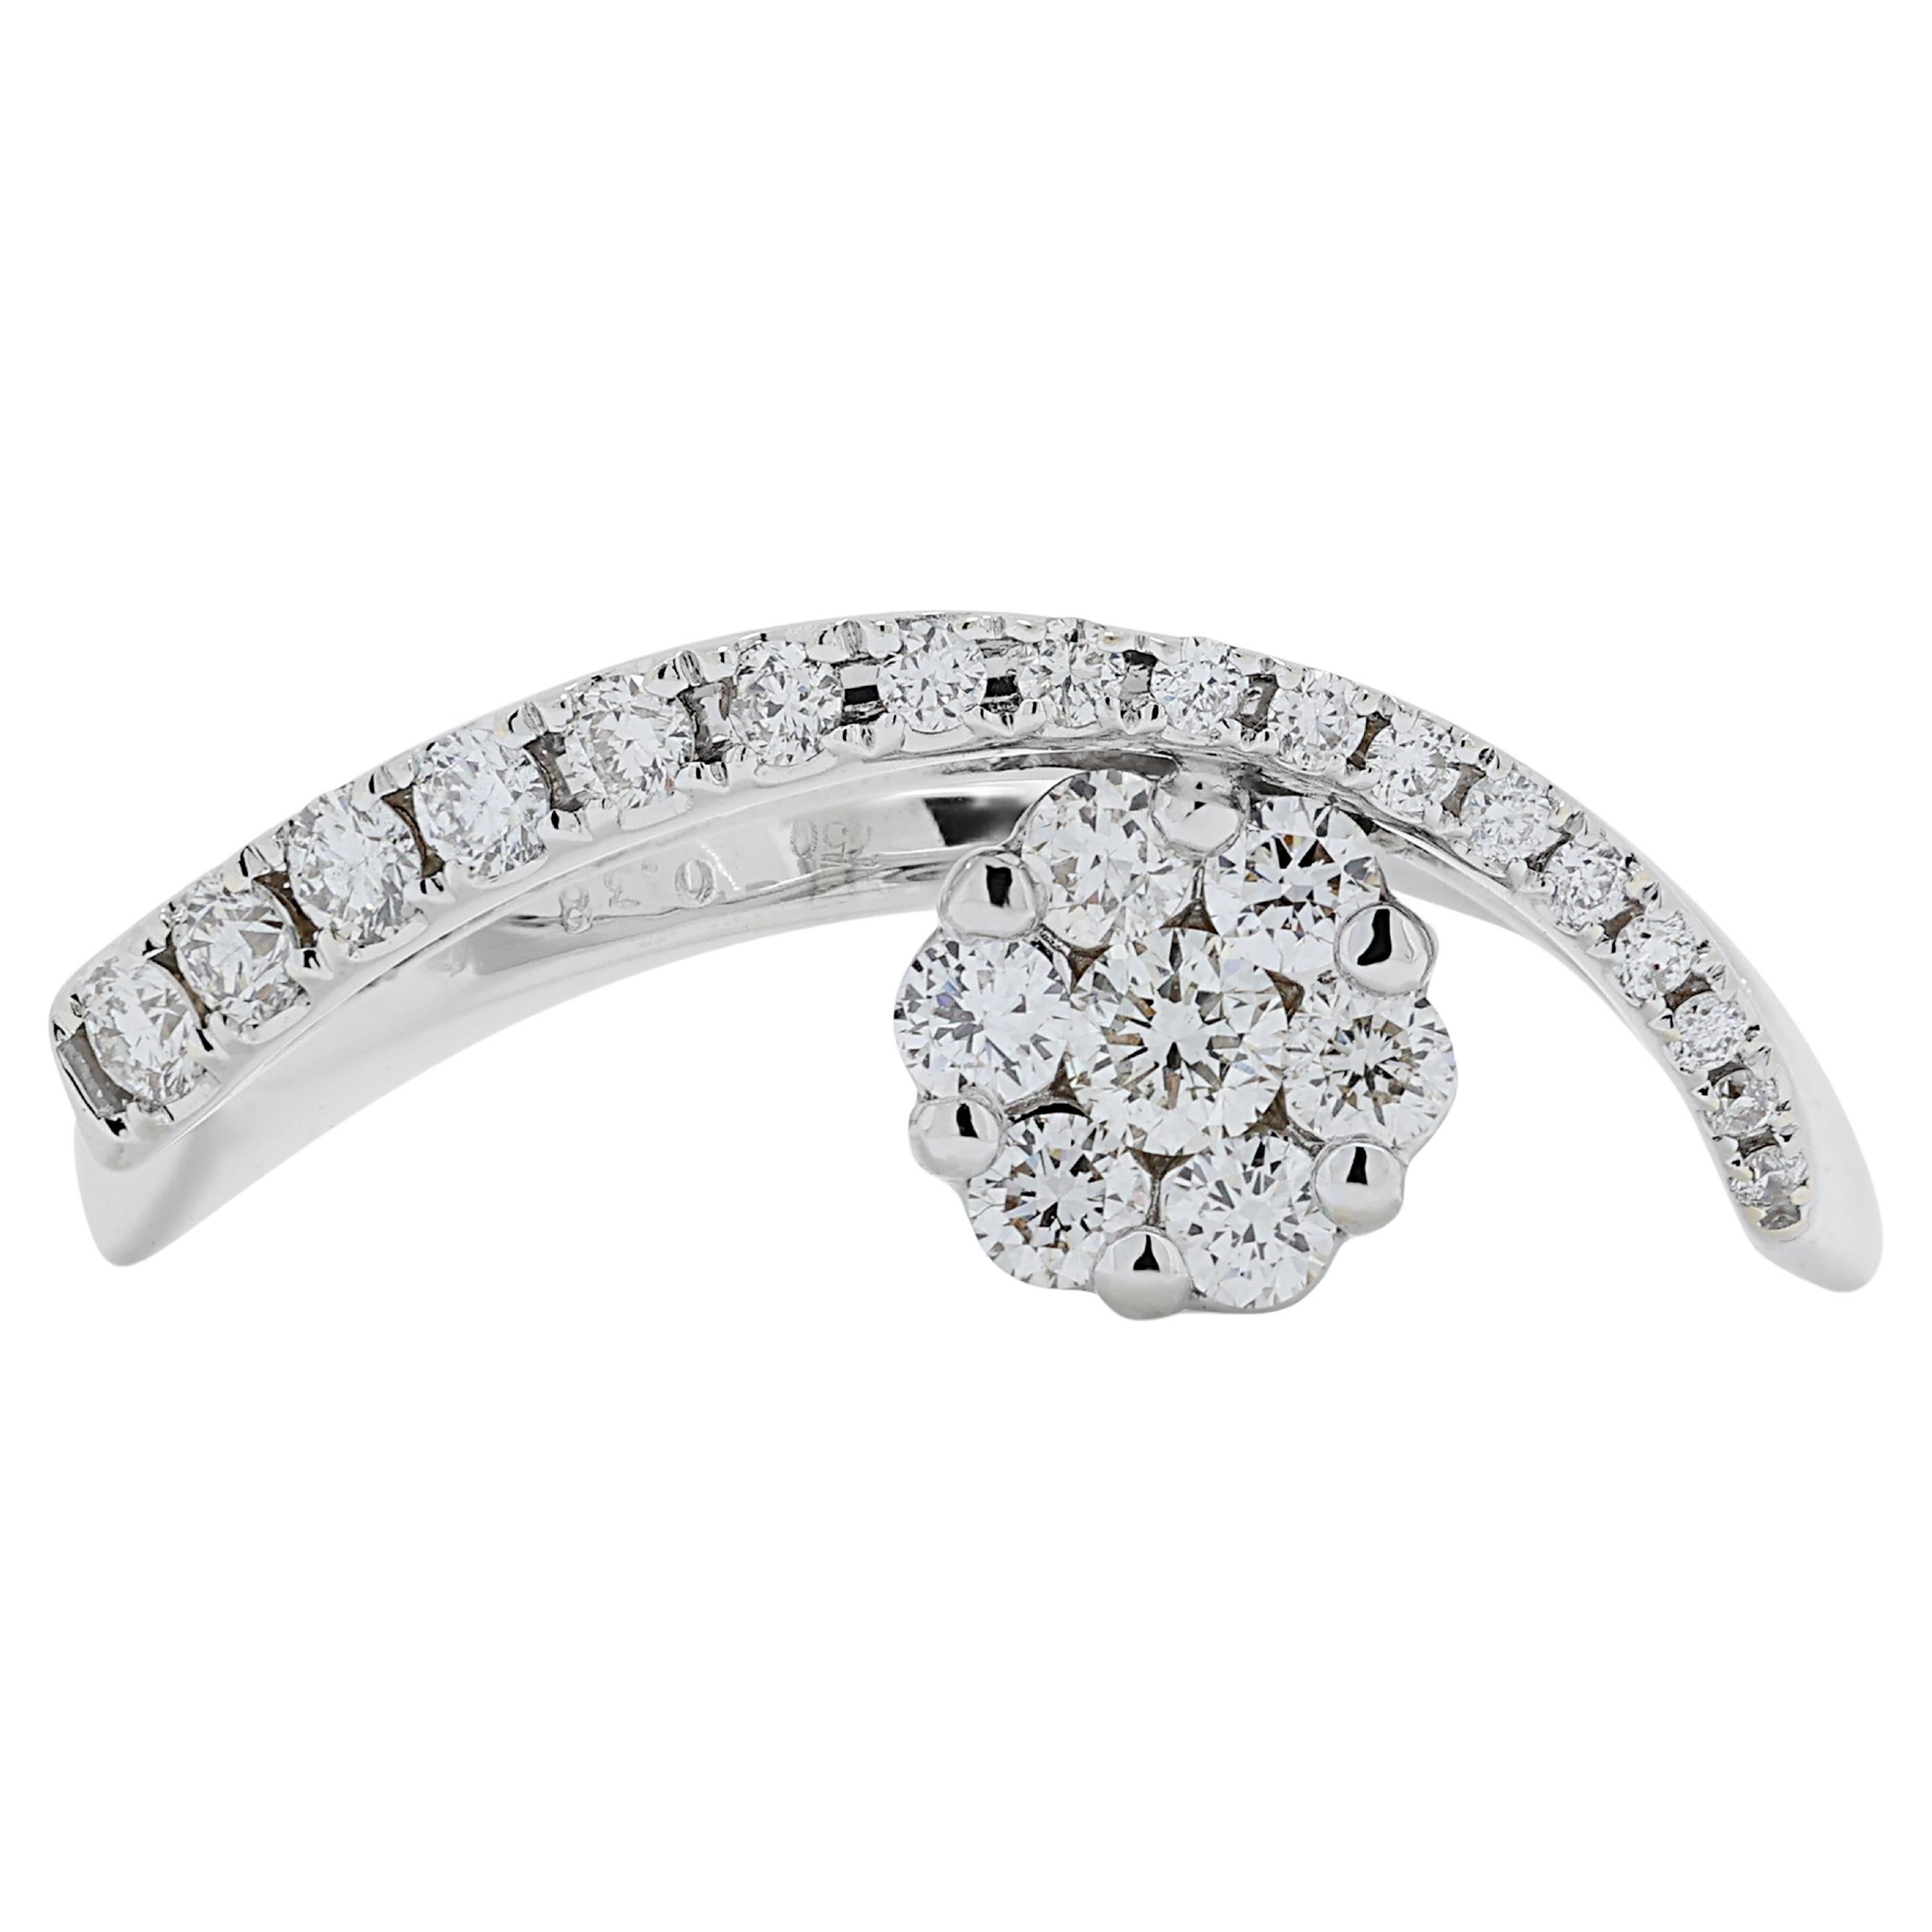 Stylish 0.85ct Diamonds Ring in 18K White Gold In New Condition For Sale In רמת גן, IL